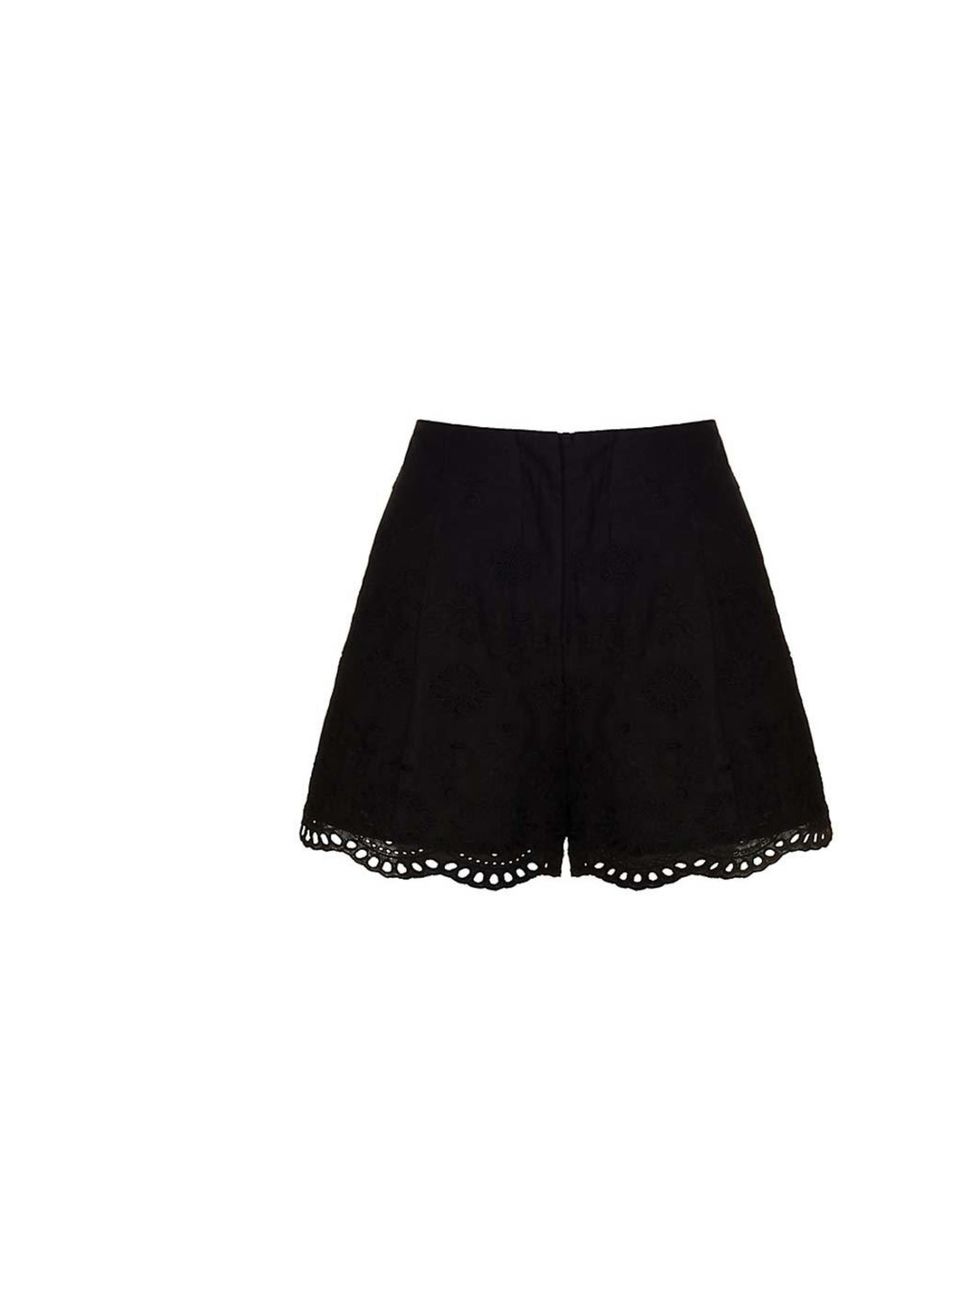 <p>Senior Beauty Writer Amy Lawrenson will wear a grey marl tee and simple tan sandals with these broderie anglaise shorts for understated and elegant summer style.</p><p>Somerset by Alice Temperley shorts, £69 at <a href="http://www.johnlewis.com/somerse